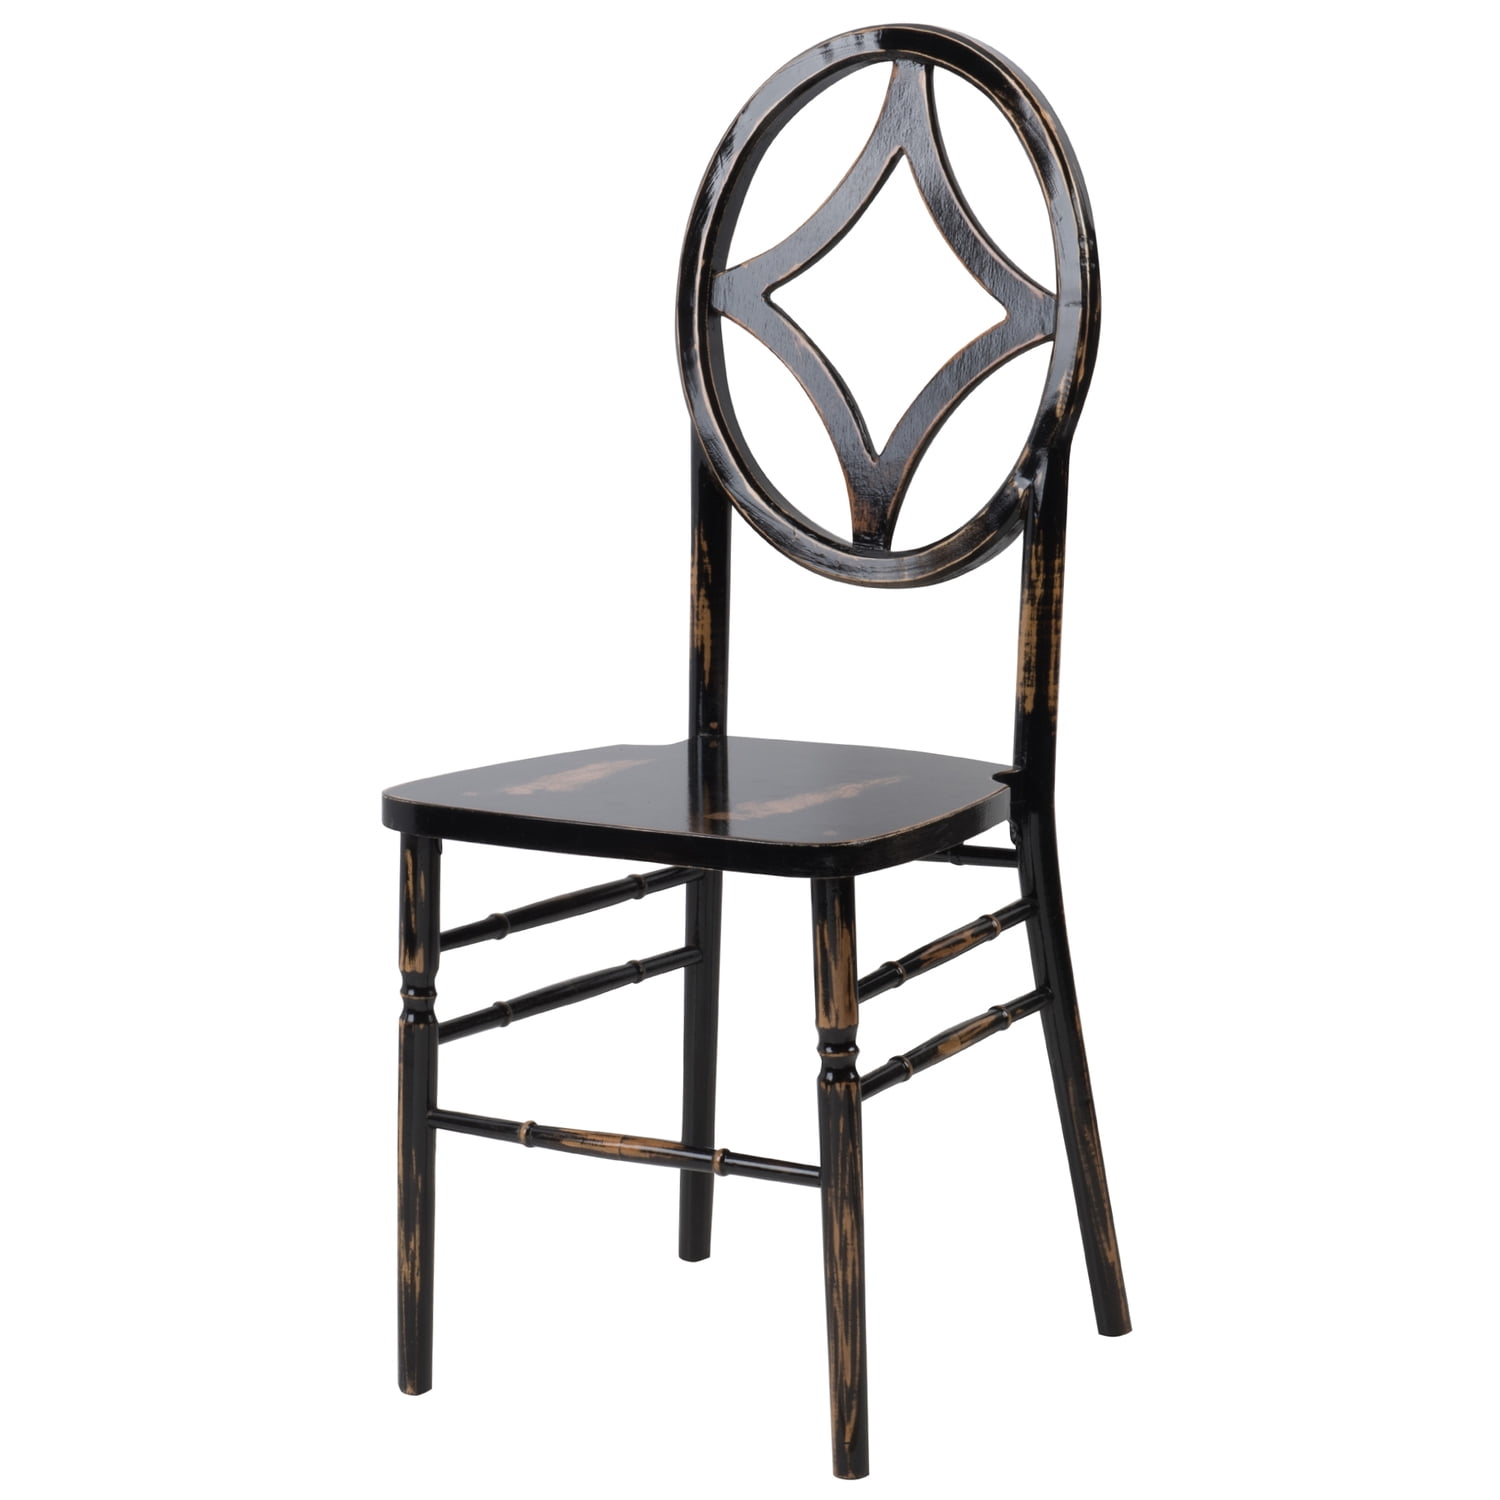 W-434-vr-diamond-lwb Veronique Series Stackable Diamond Wood Dining Chair - Lime Black Wash - 38.75 In.